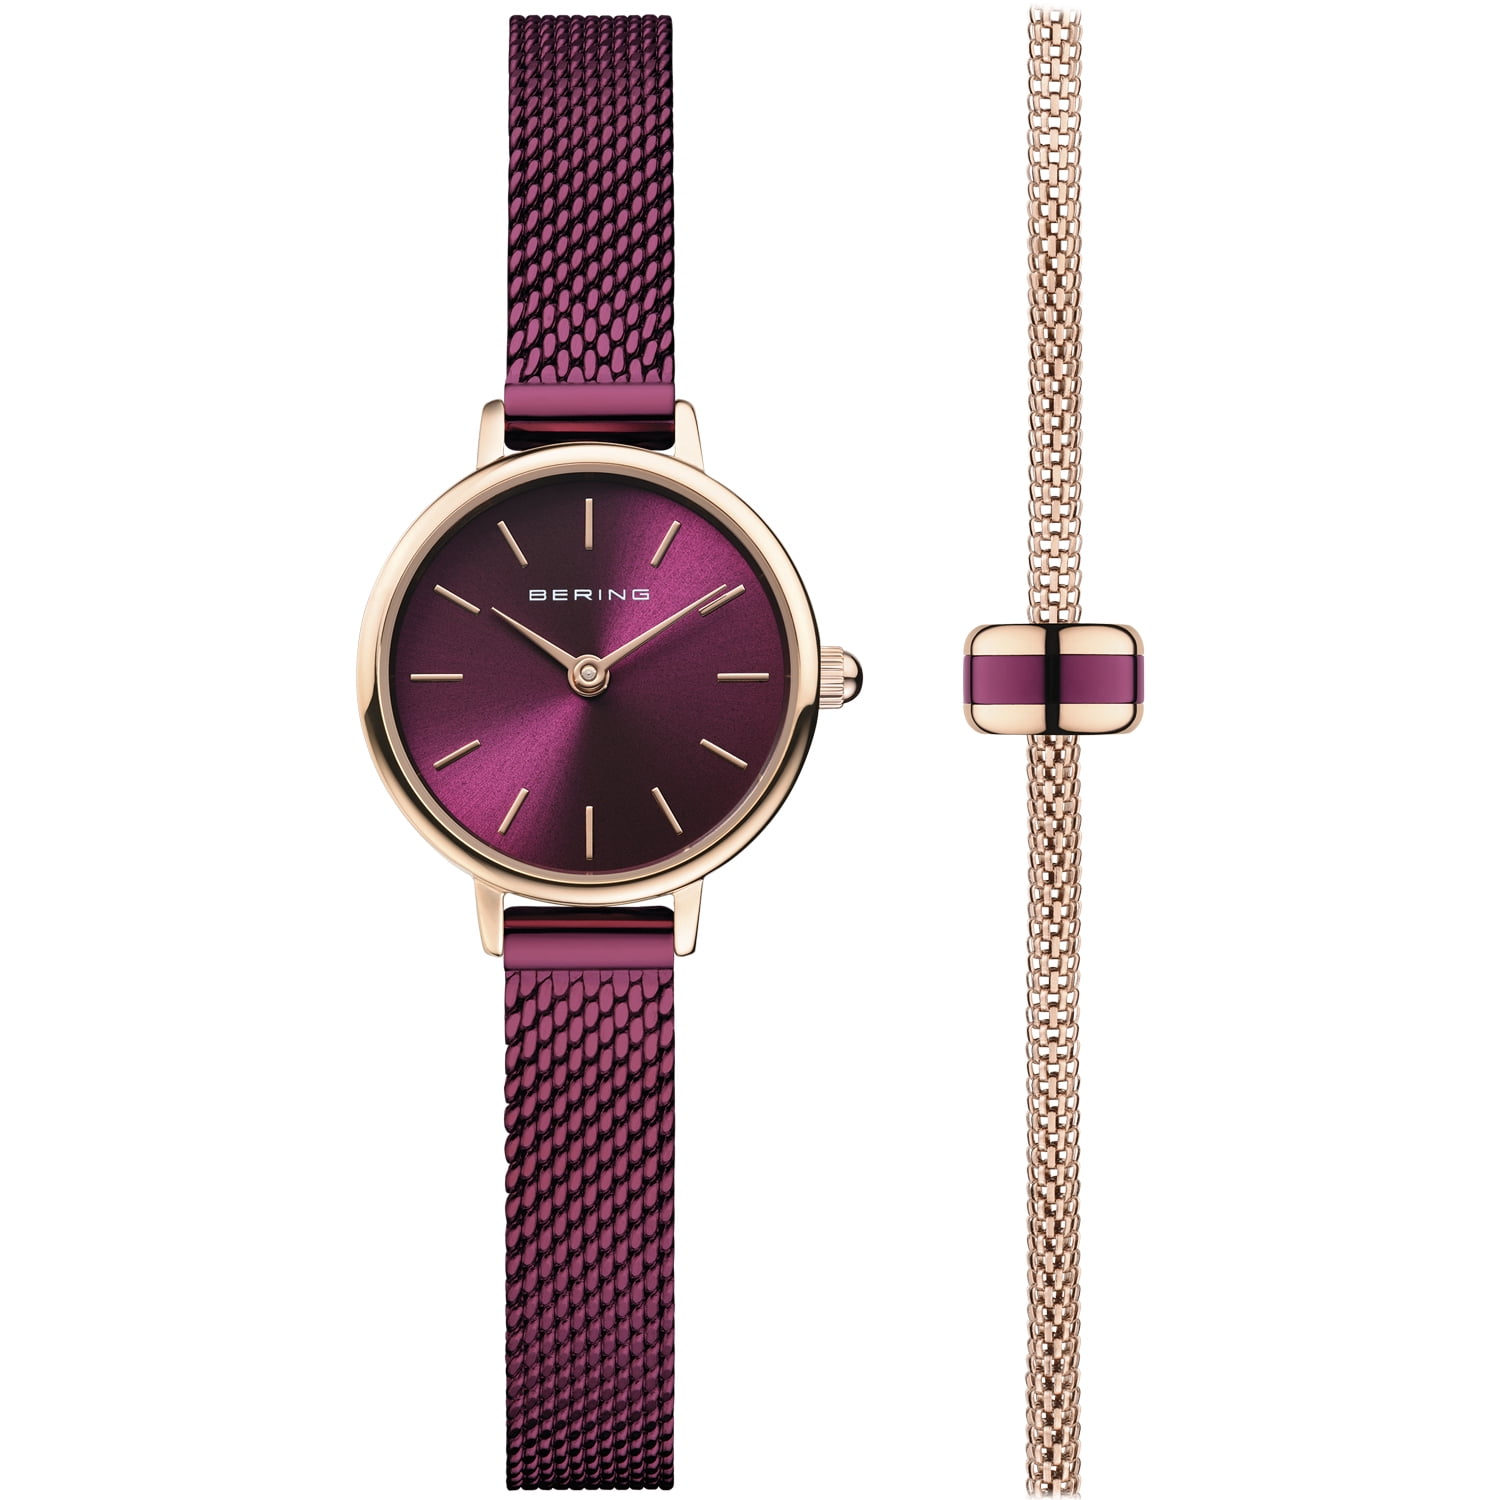 BERING Women's Watch Set With Purple Mesh Strap Watch with Mesh